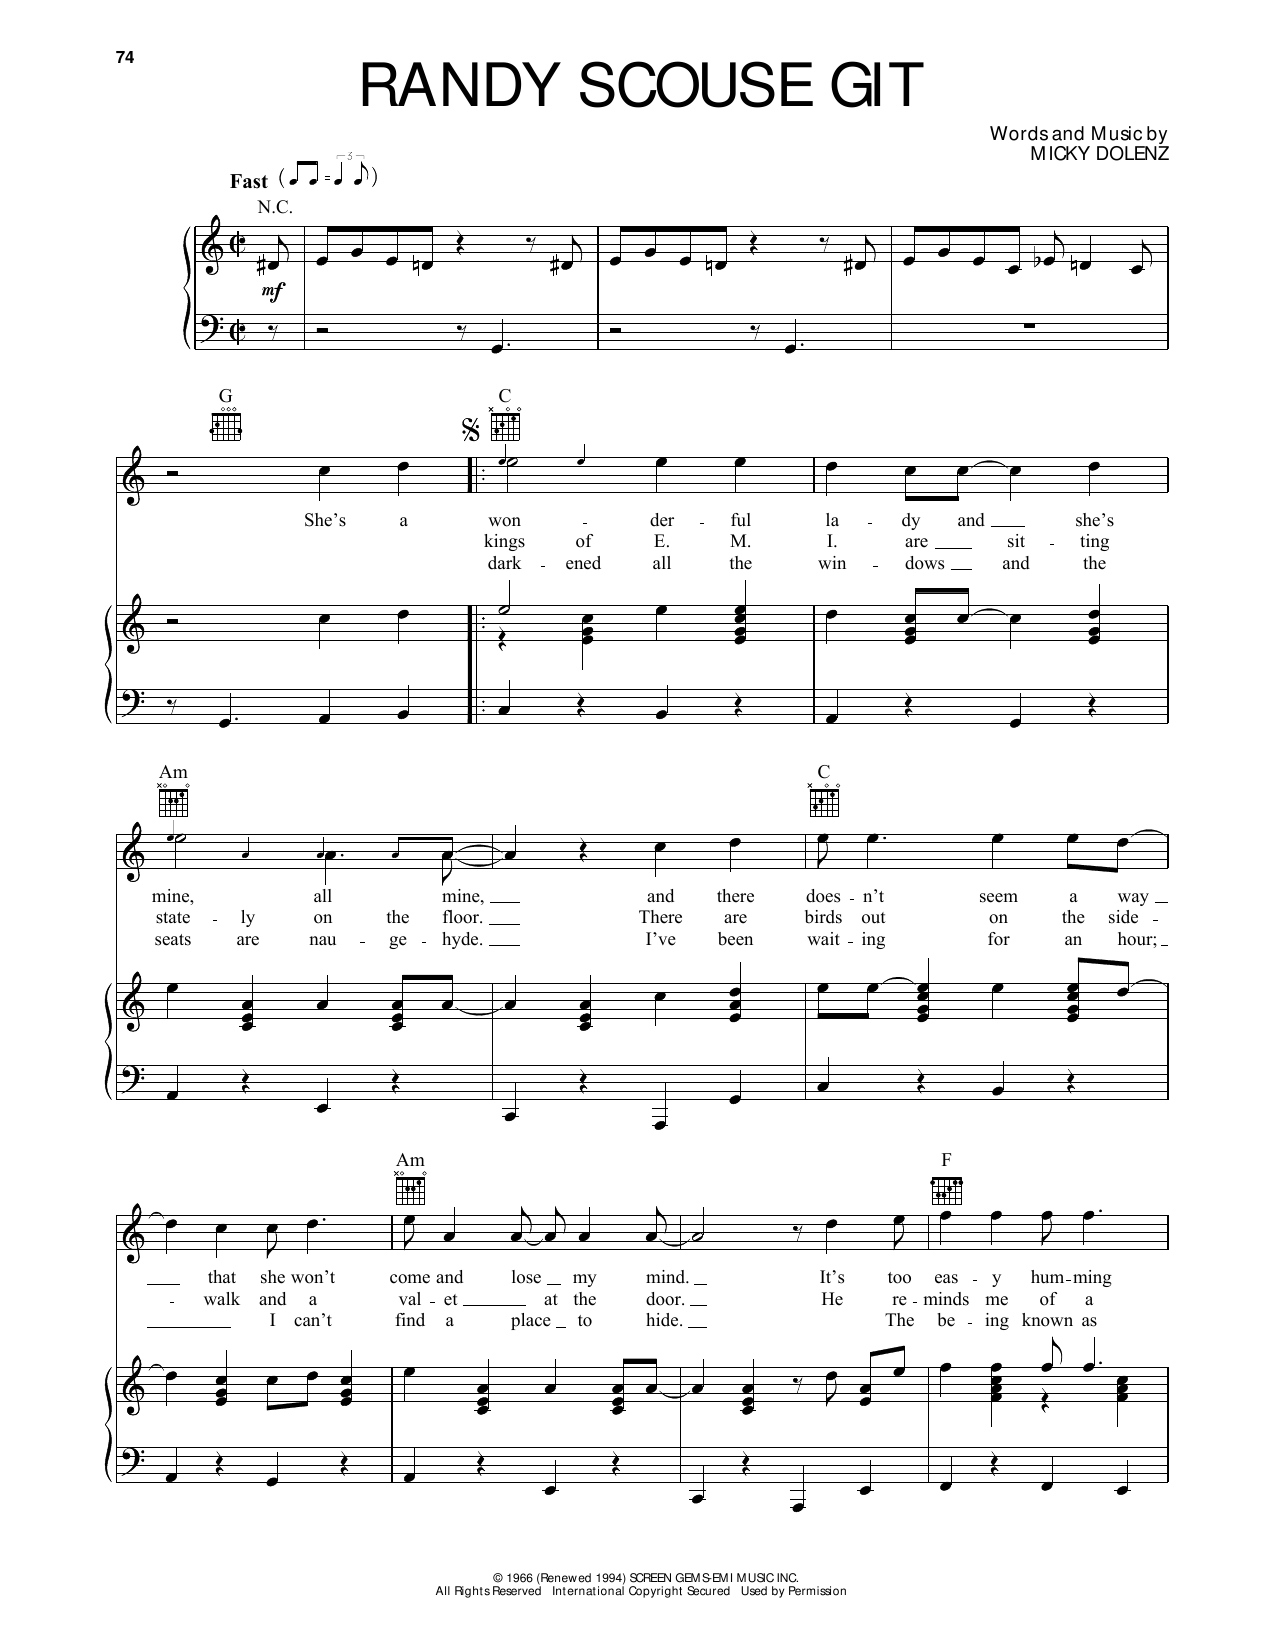 Download The Monkees Randy Scouse Git Sheet Music